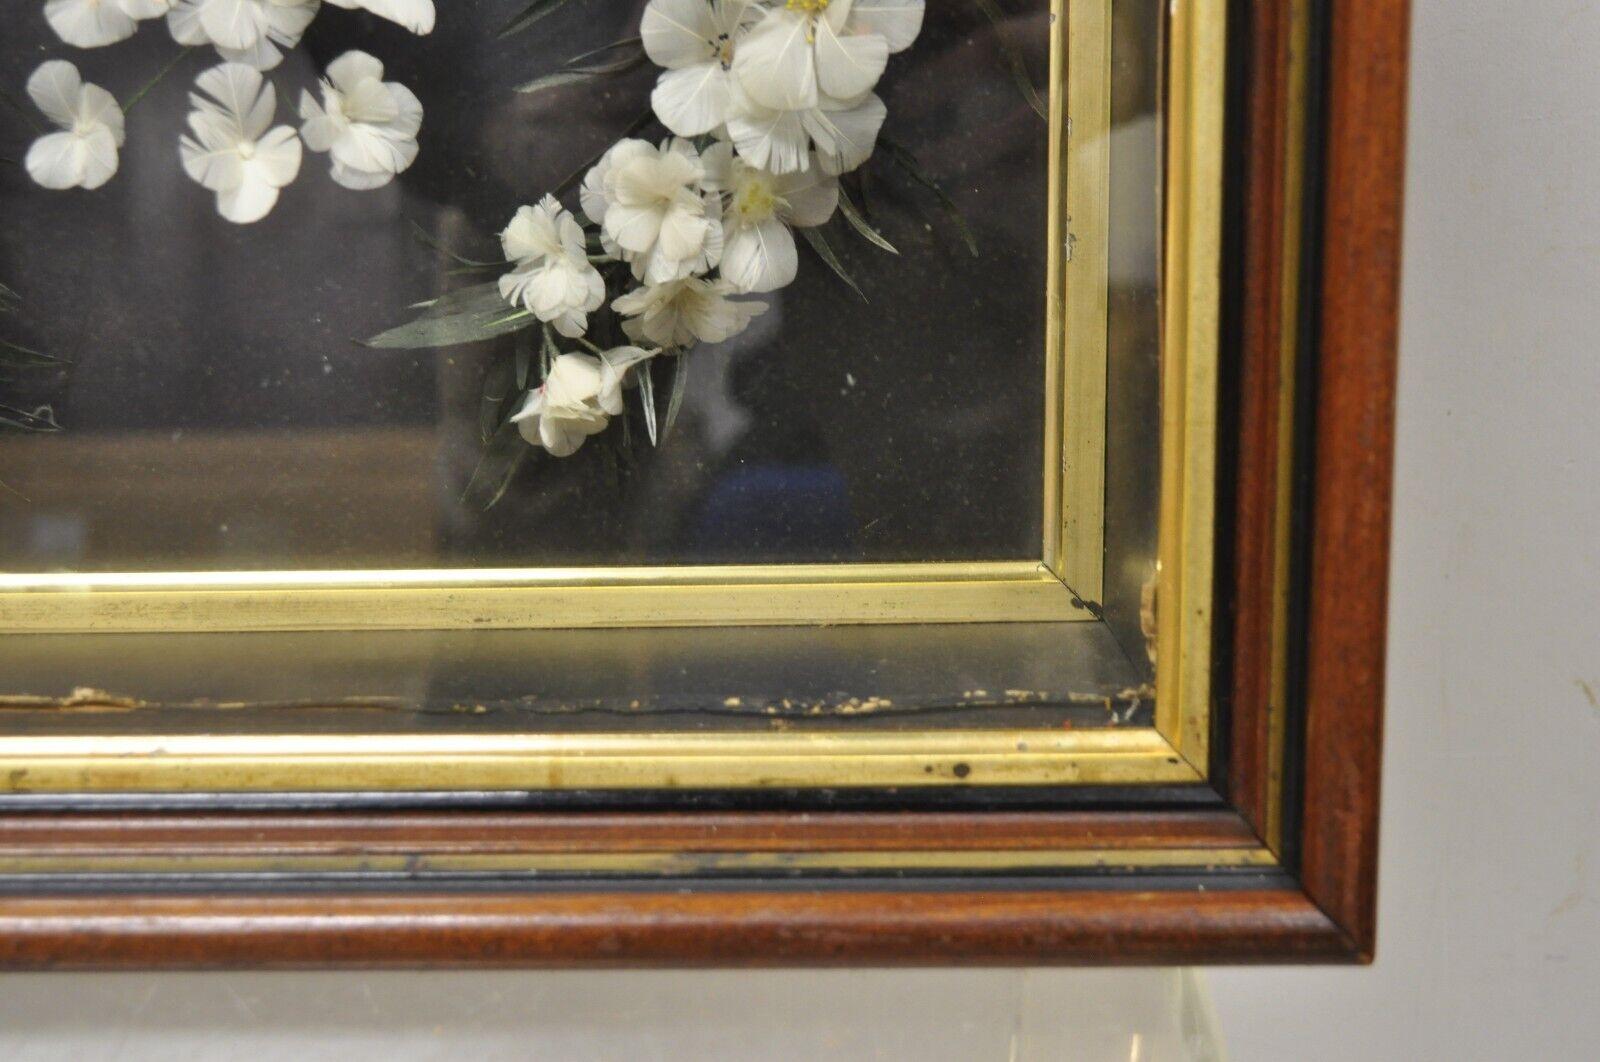 19th Century Antique Victorian White Feather Floral Mourning Wreath Mahogany Wood Shadow Box For Sale